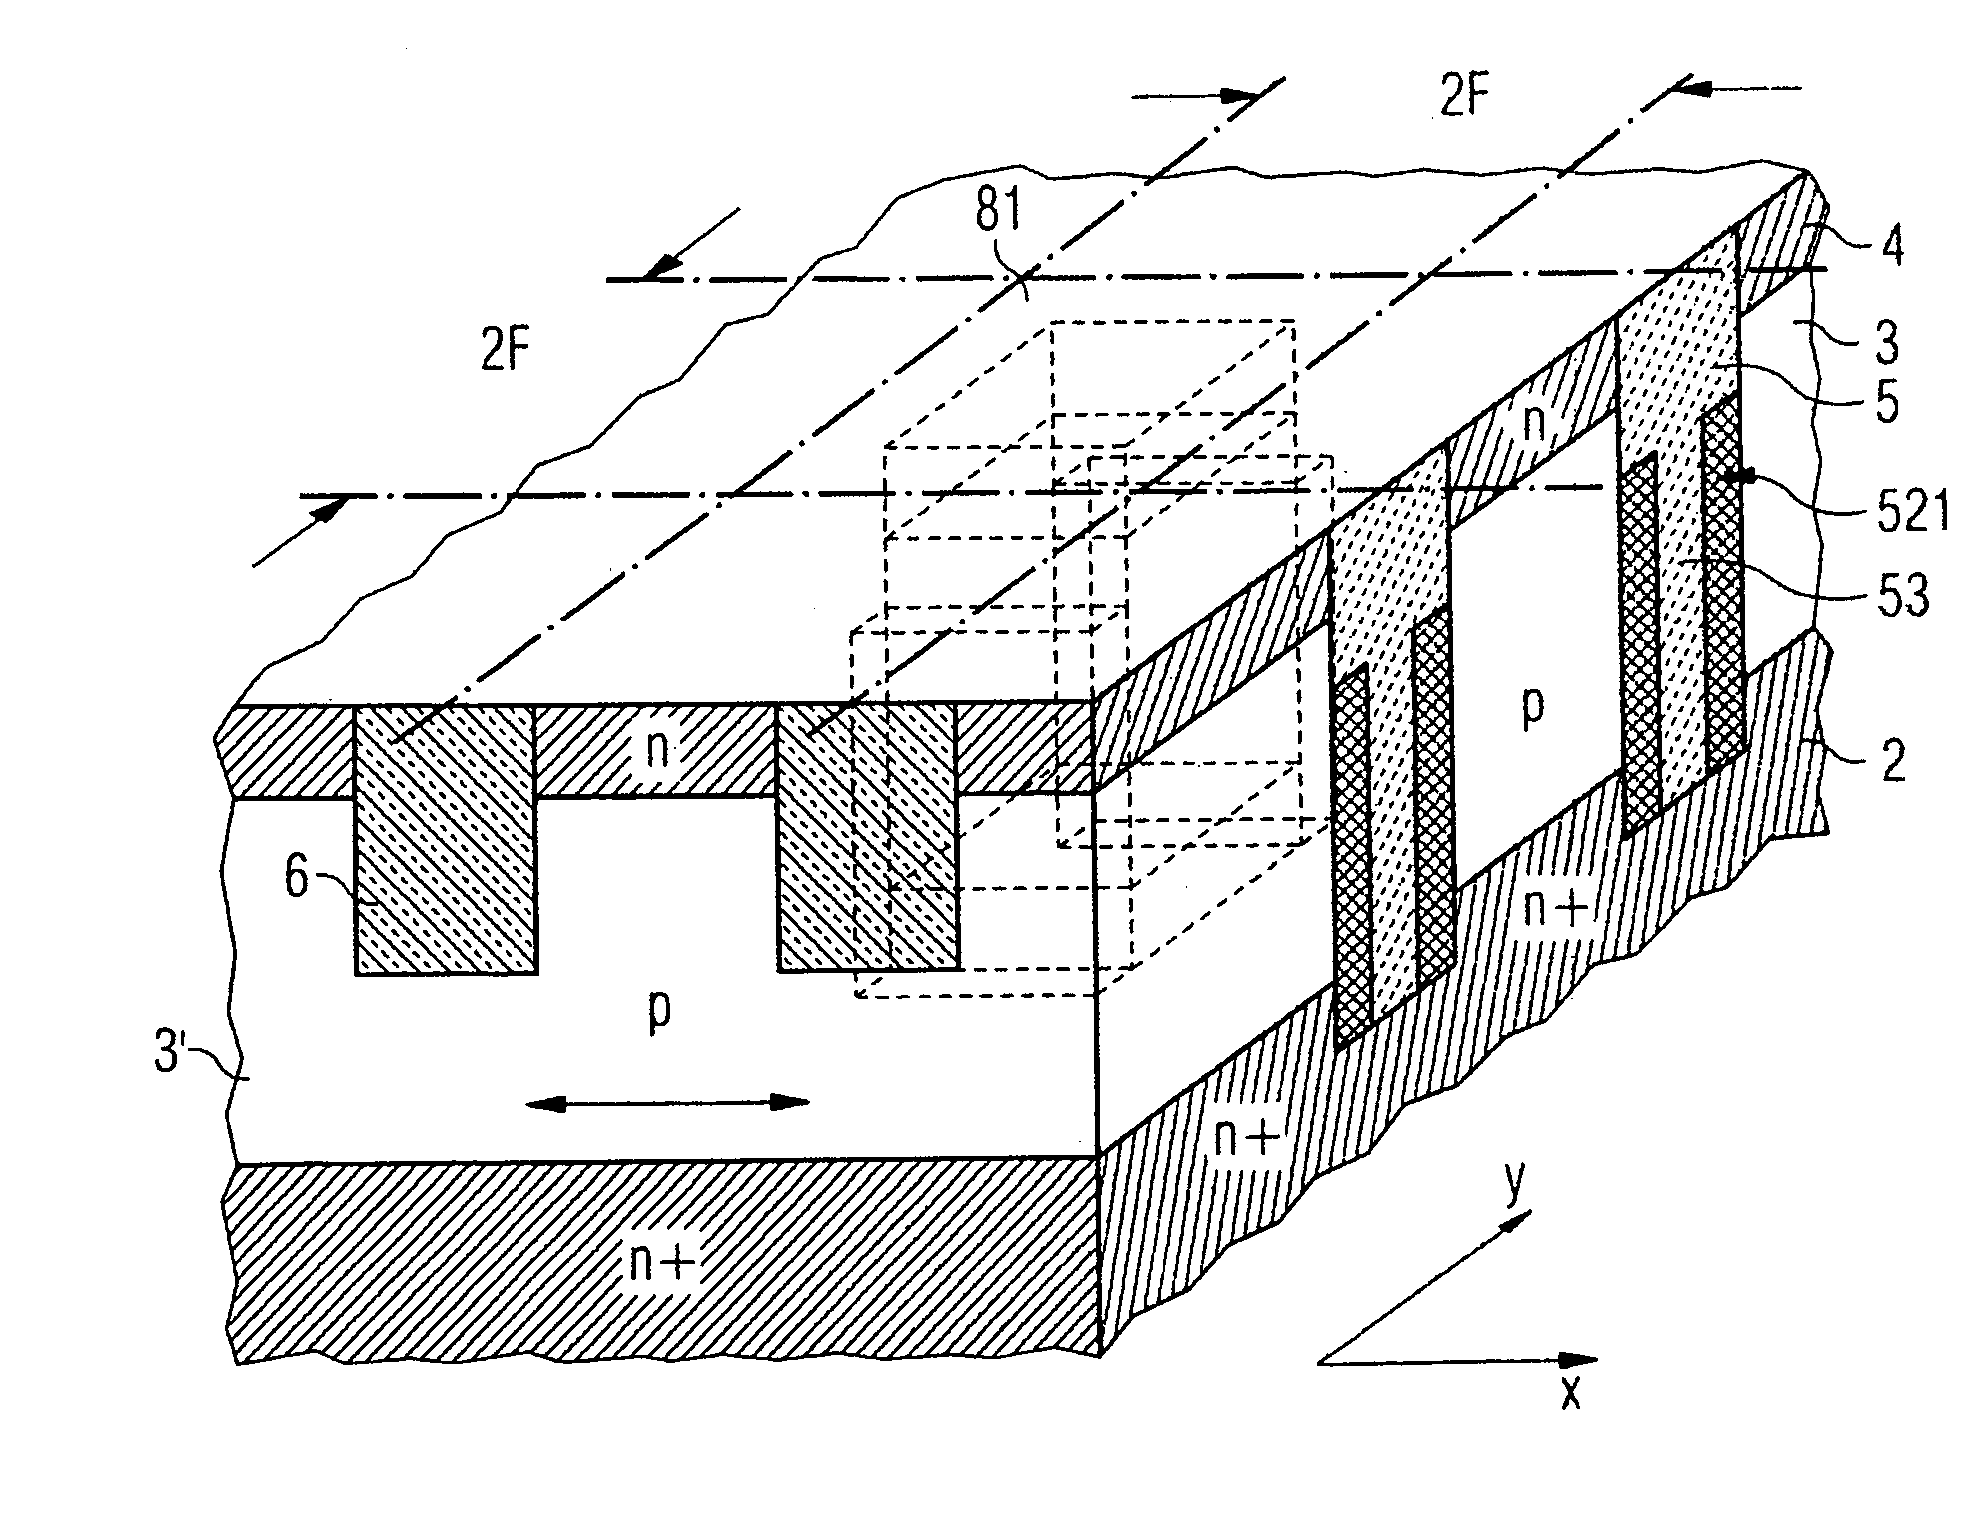 Architecture for vertical transistor cells and transistor-controlled memory cells